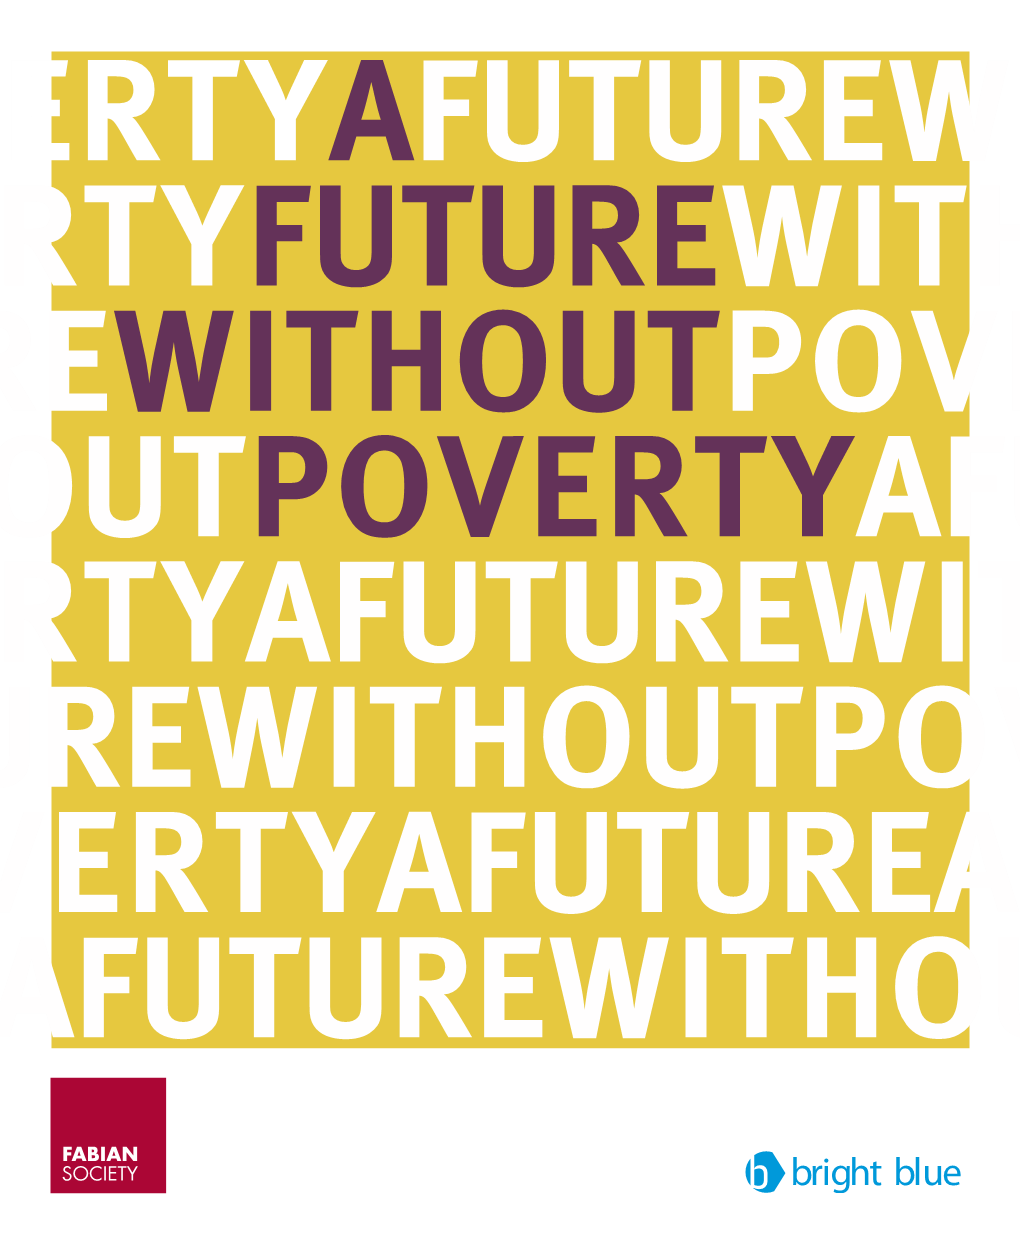 A Future Without Poverty’